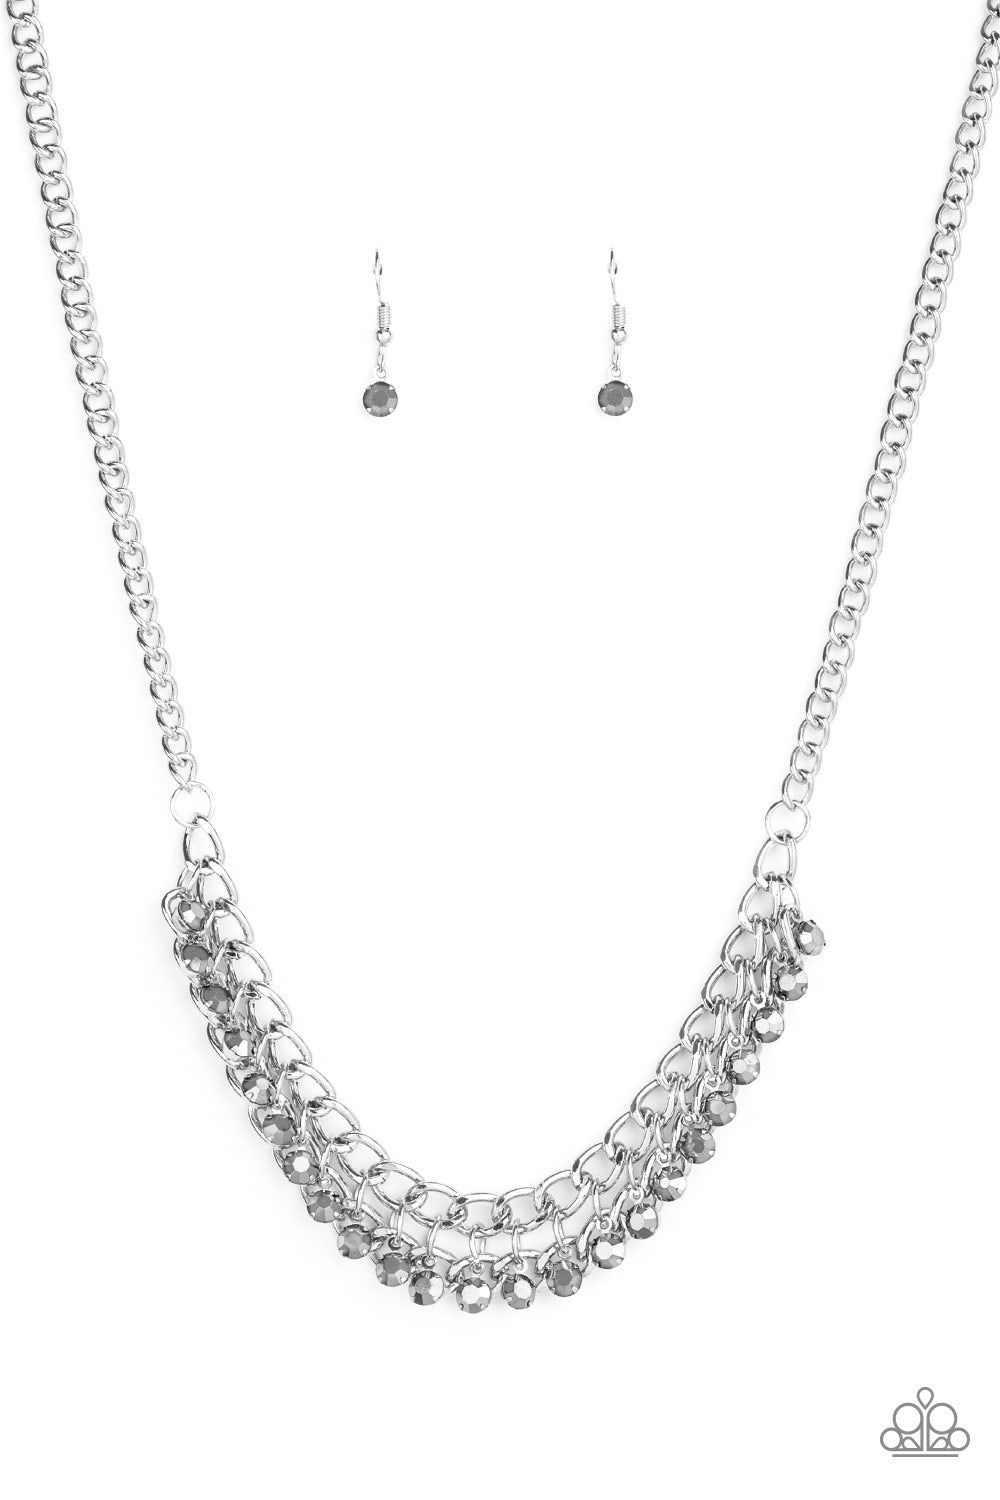 Paparazzi Glow and Grind Silver Short Necklace